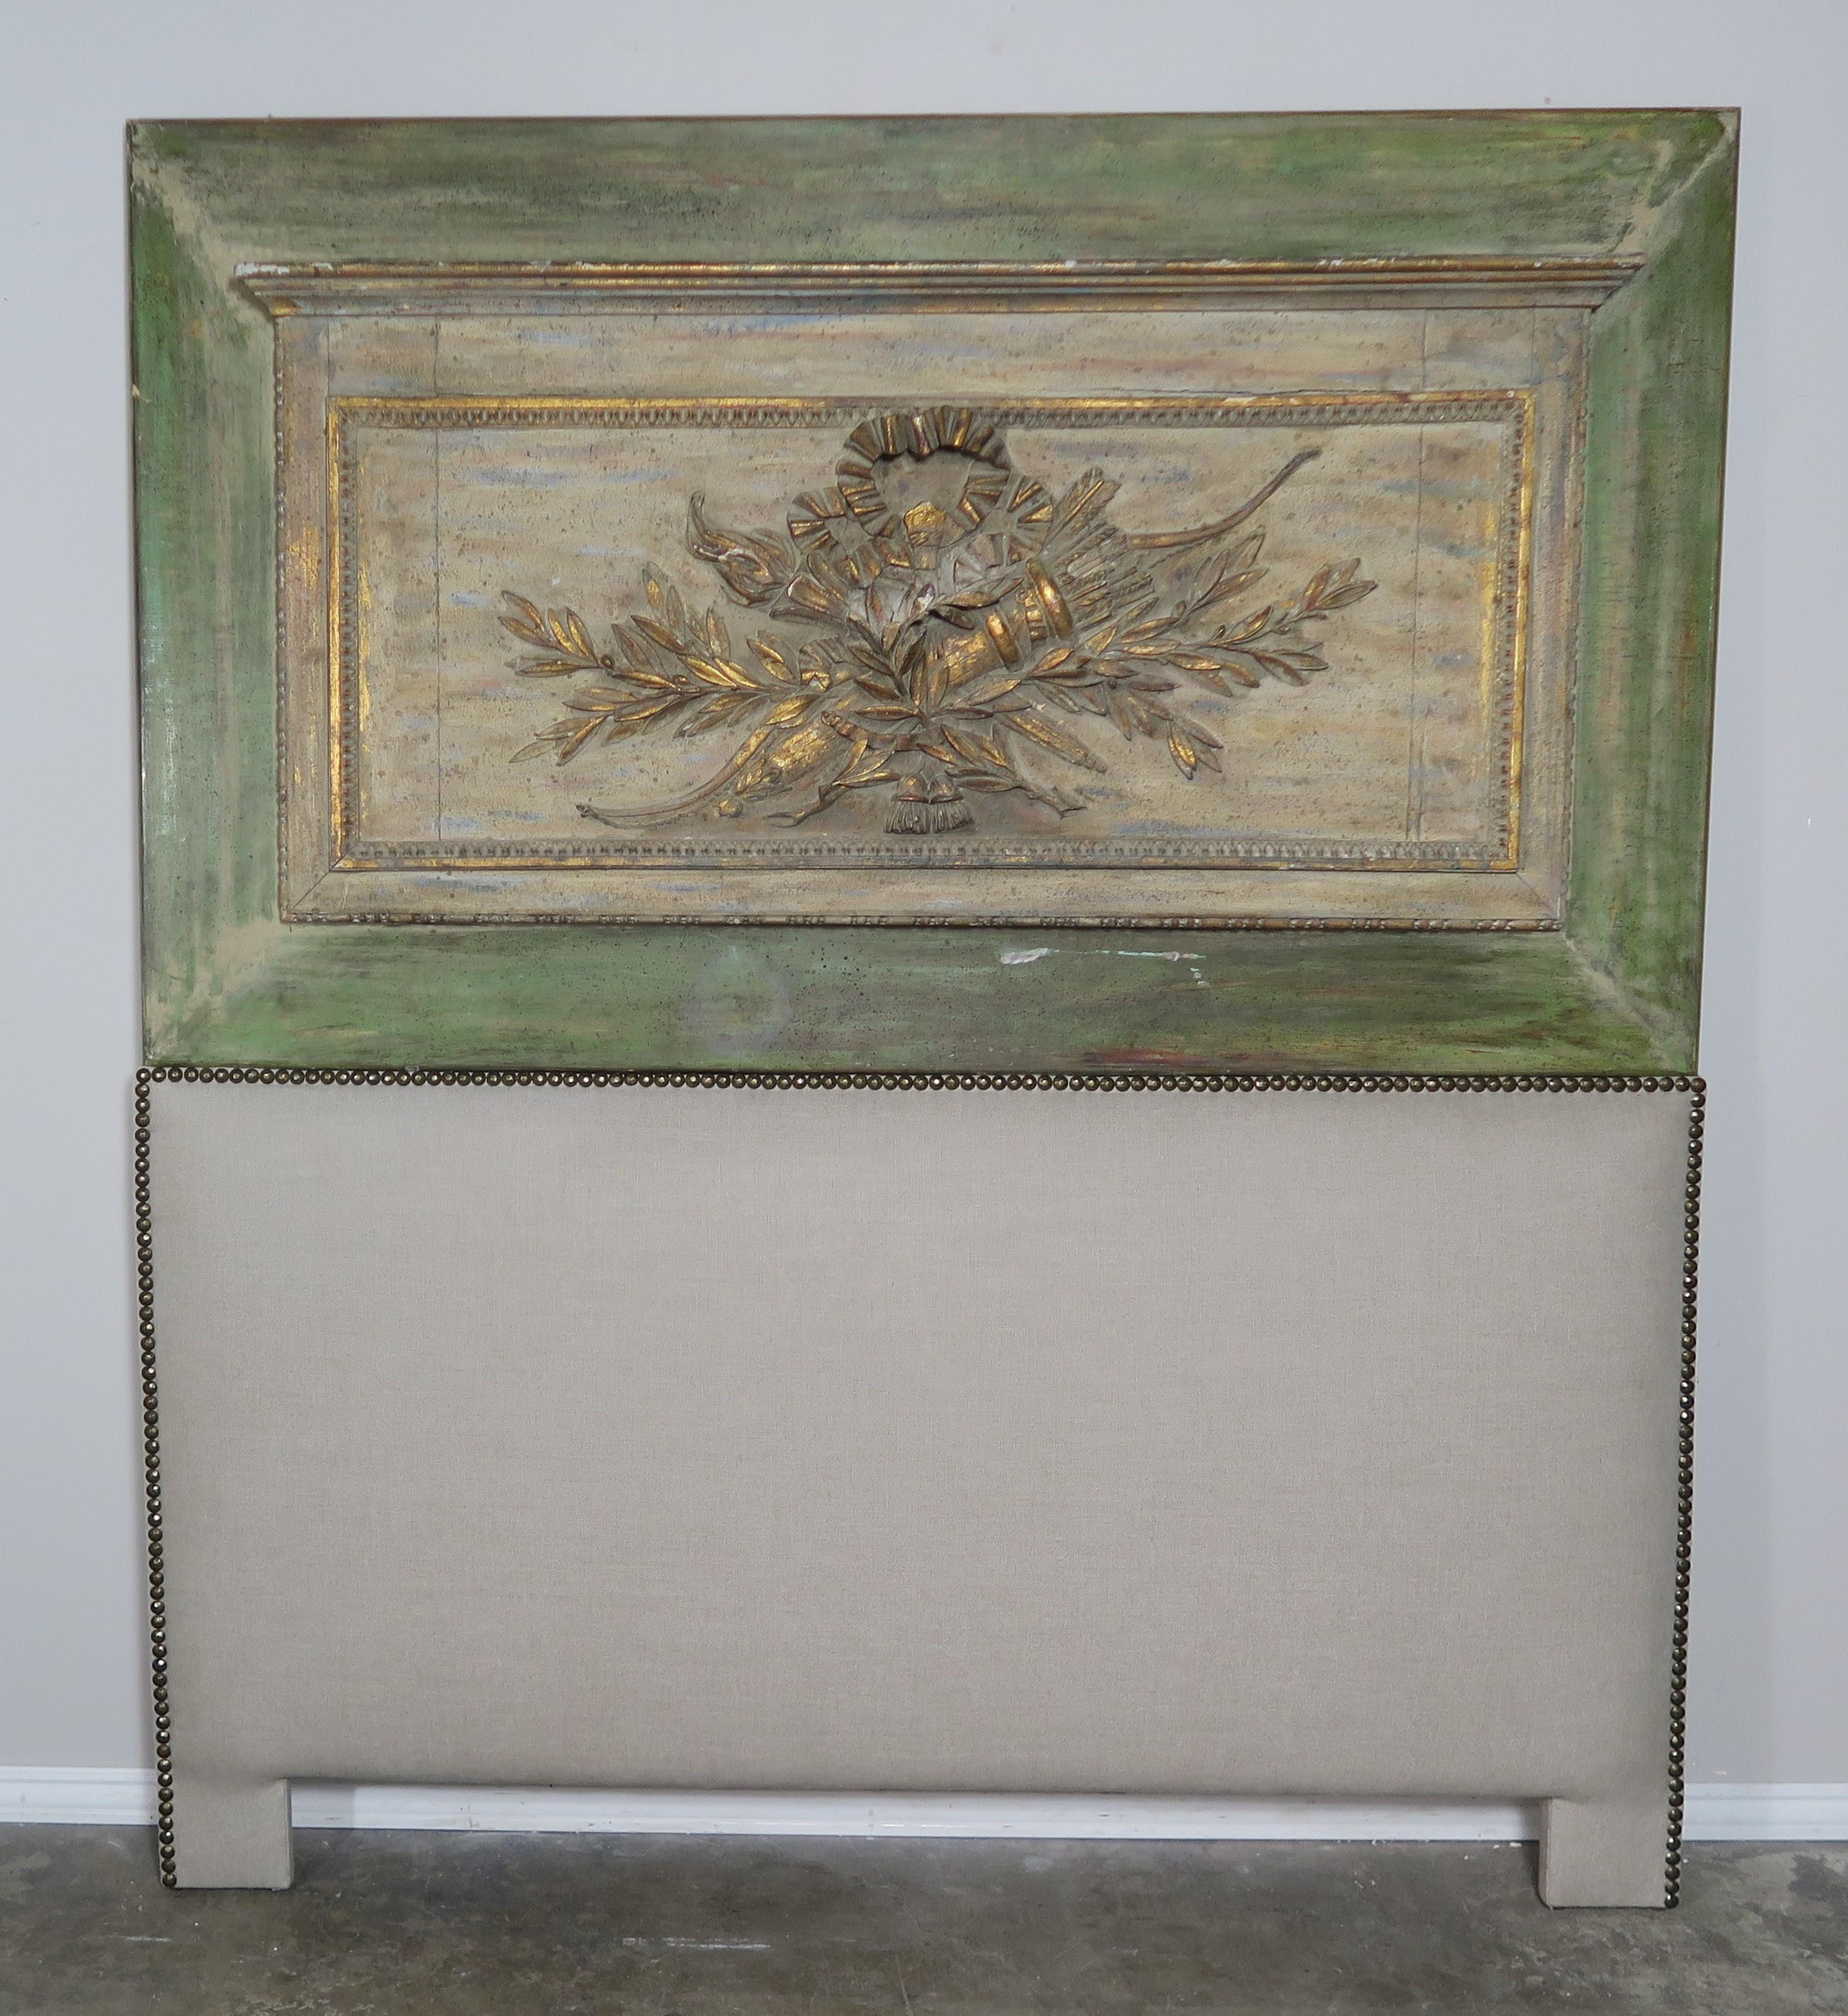 Custom queen size headboard made with a 19th century painted and parcel gilt panel depicting torches, laurel leaves and ribbon. Beautiful tiny carved beading frames the scene. The panel has been upholstered into a queen size headboard using Belgium